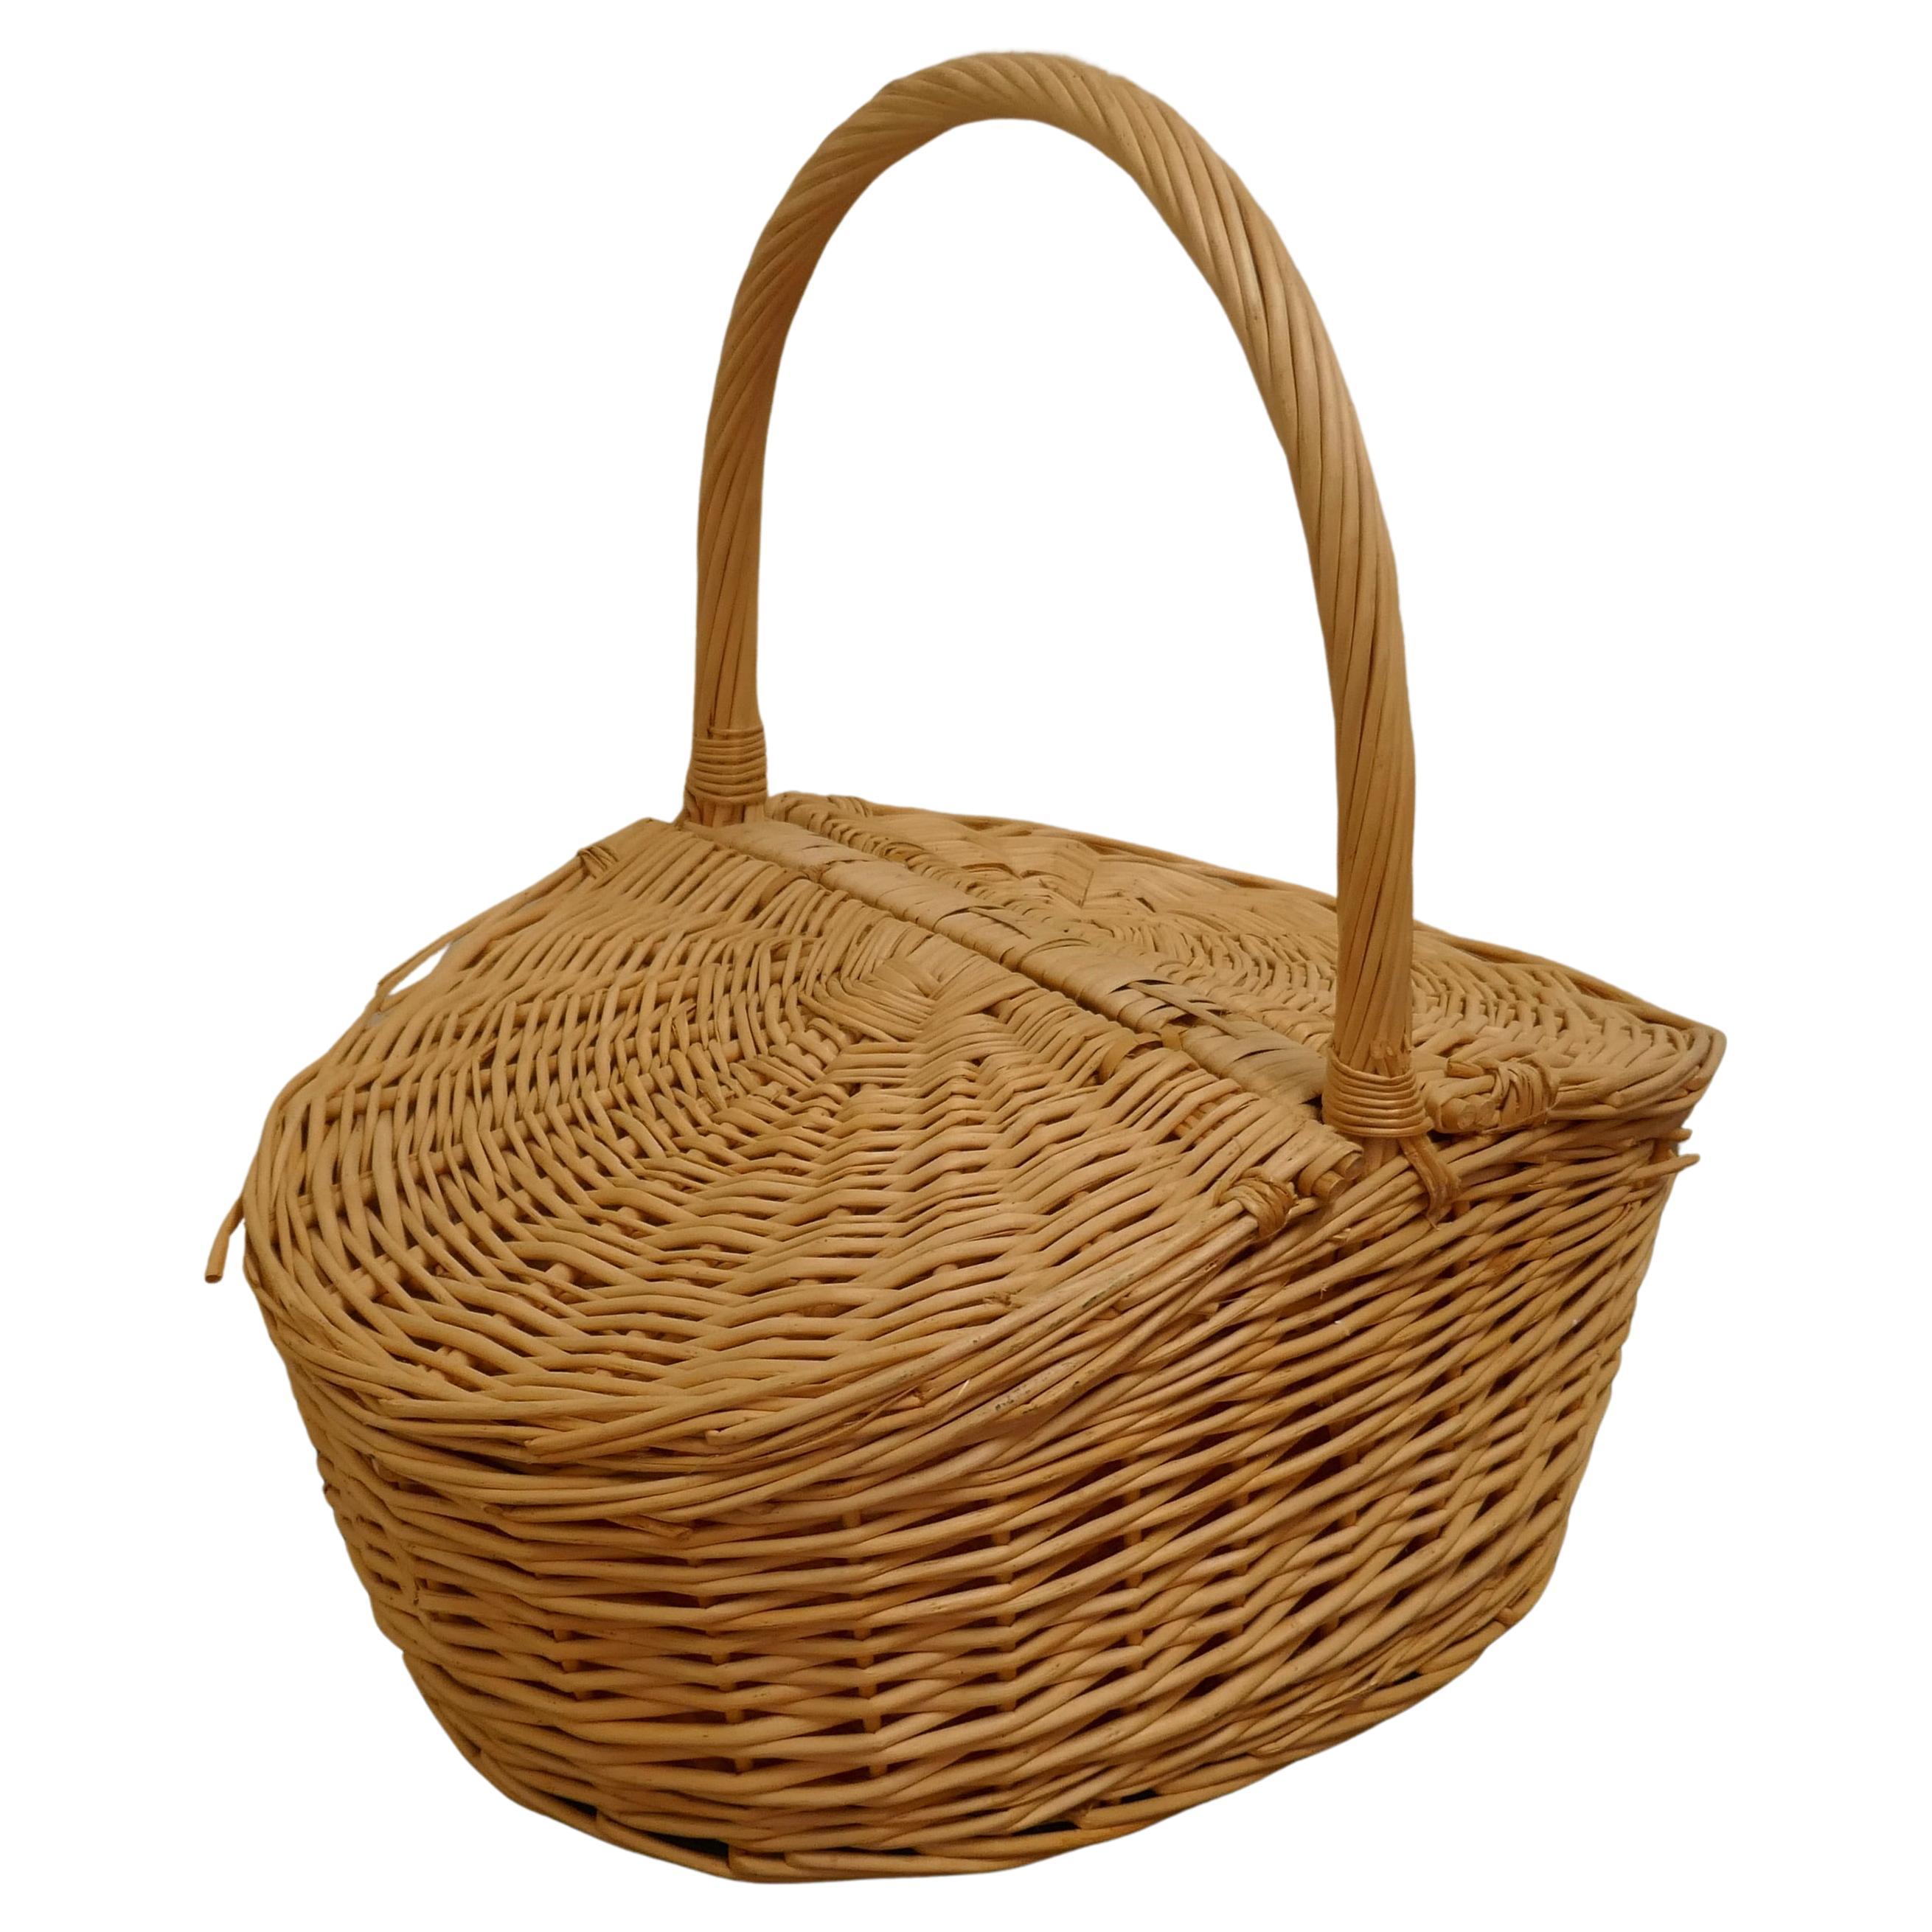 Lined Oval Wicker Picnic Basket For Sale